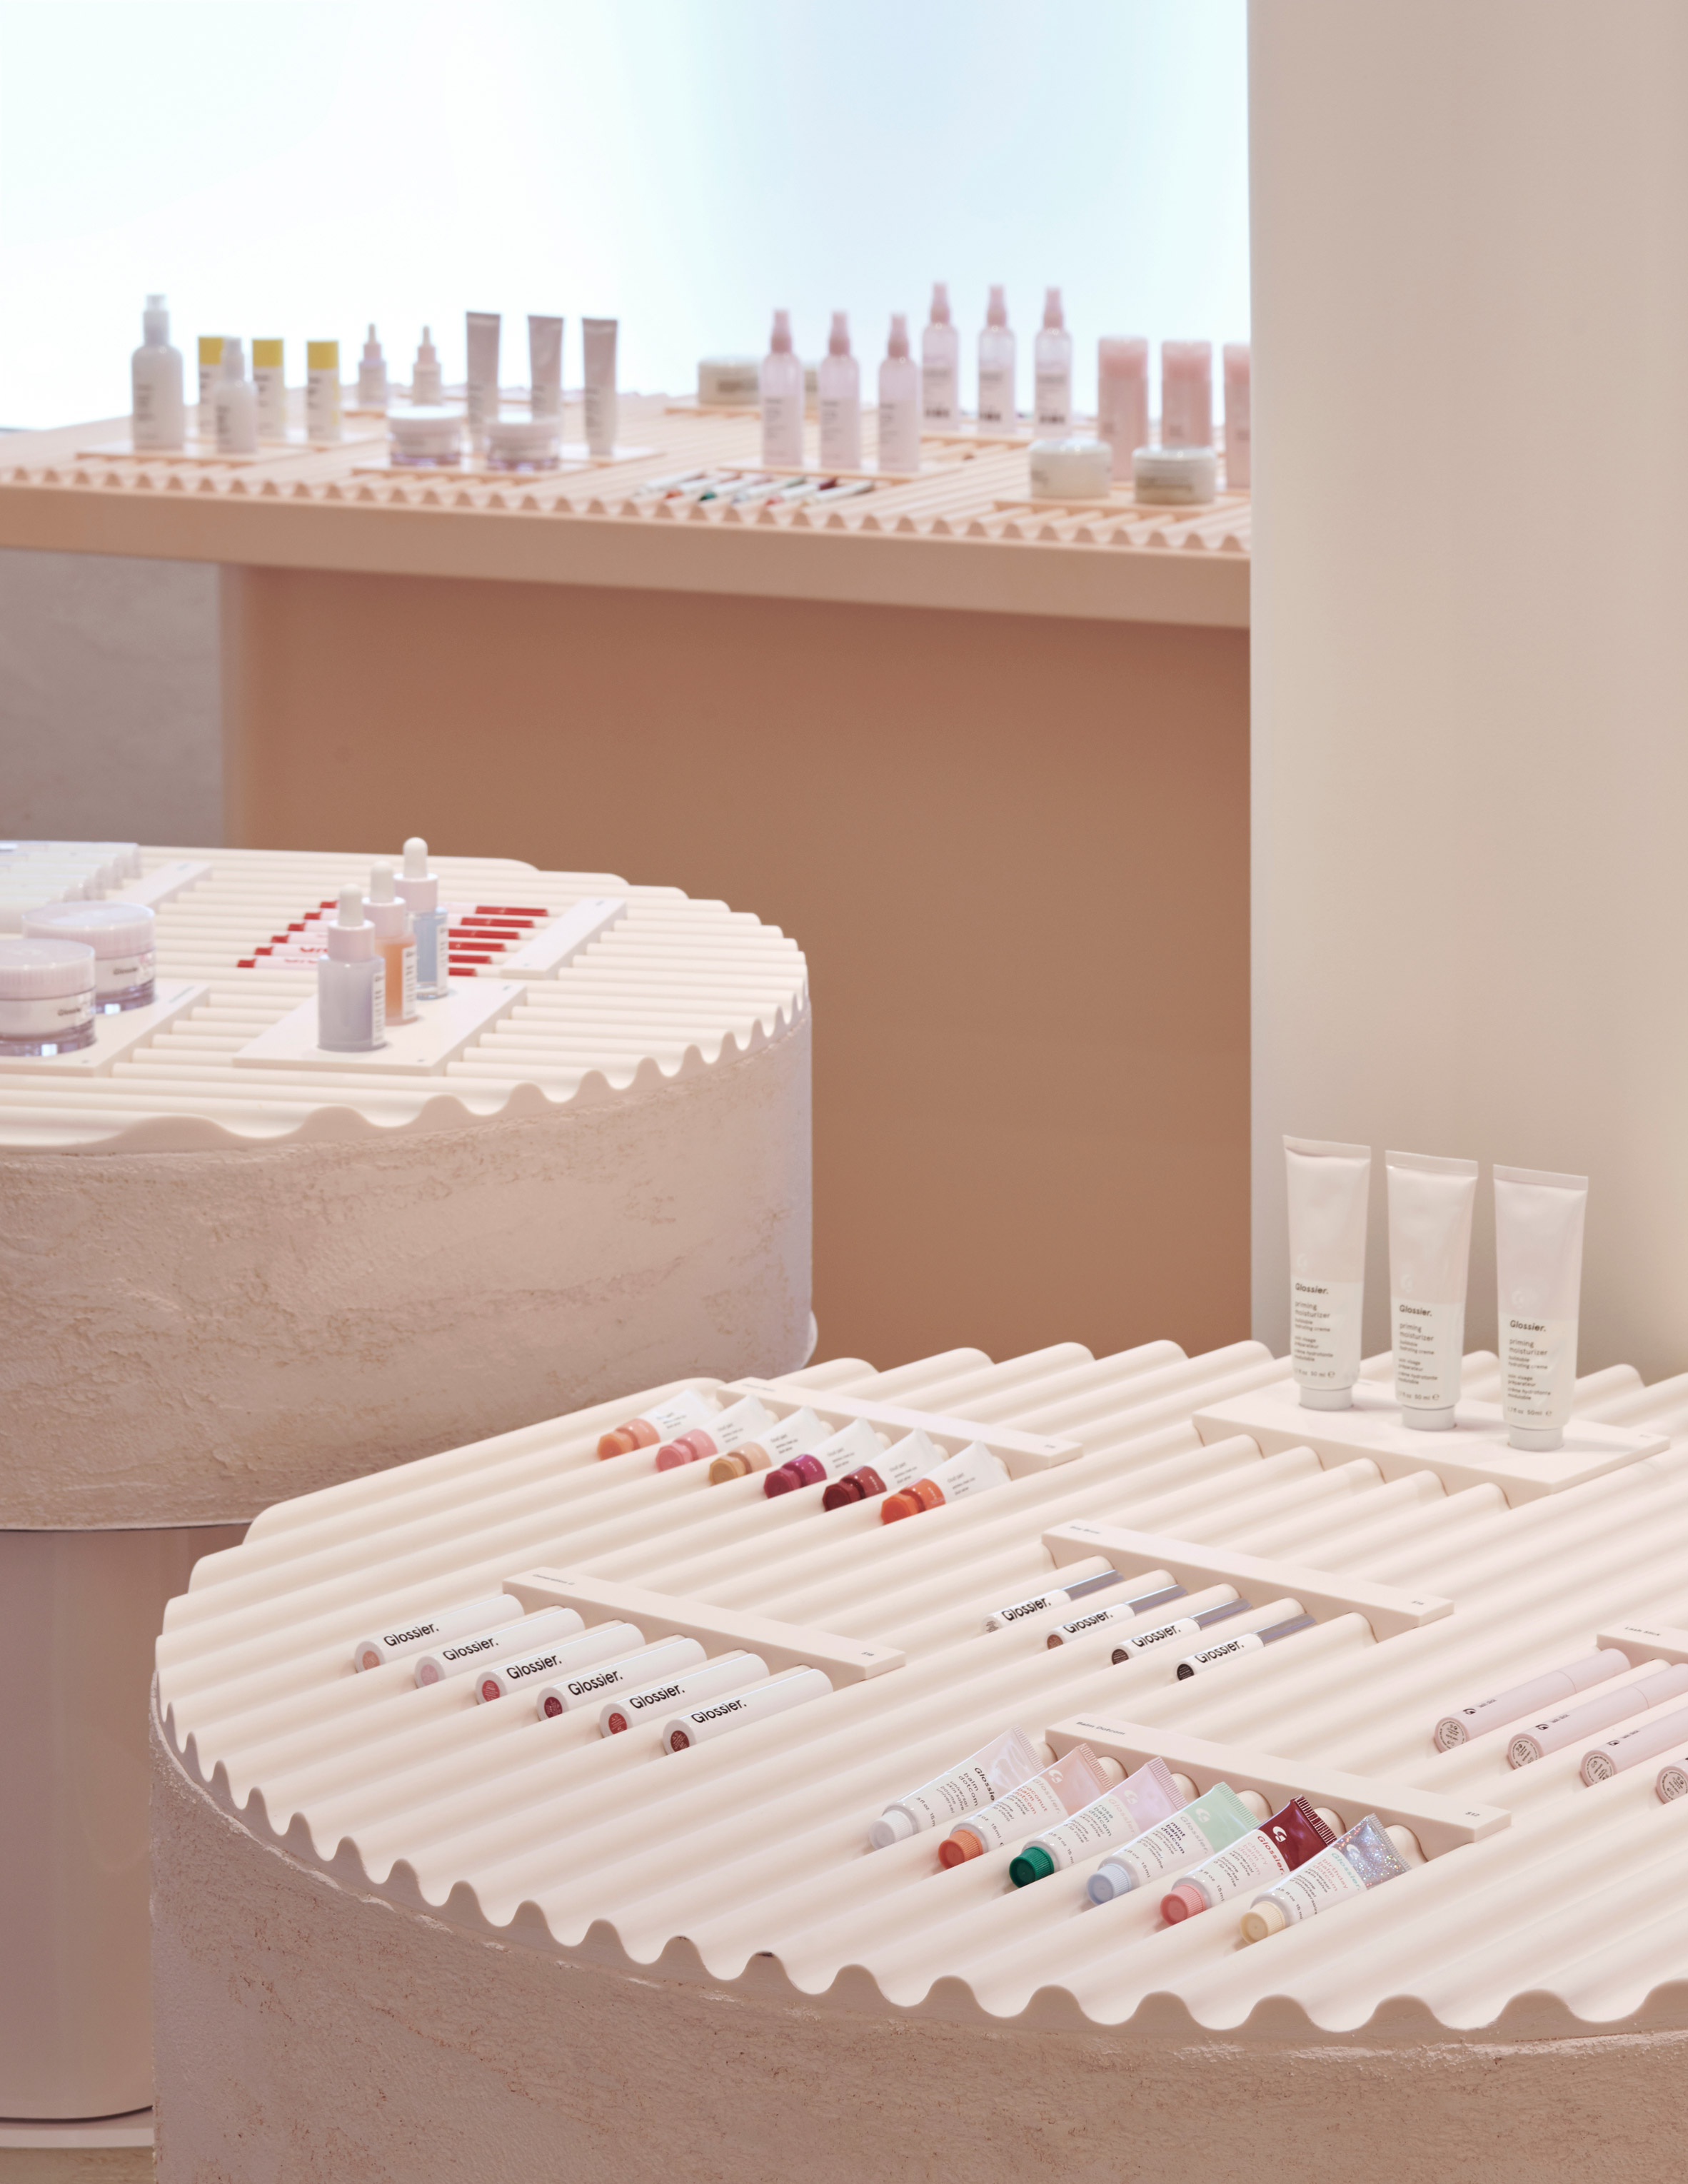 Glossier Flagship by Gachot Studios and PRO